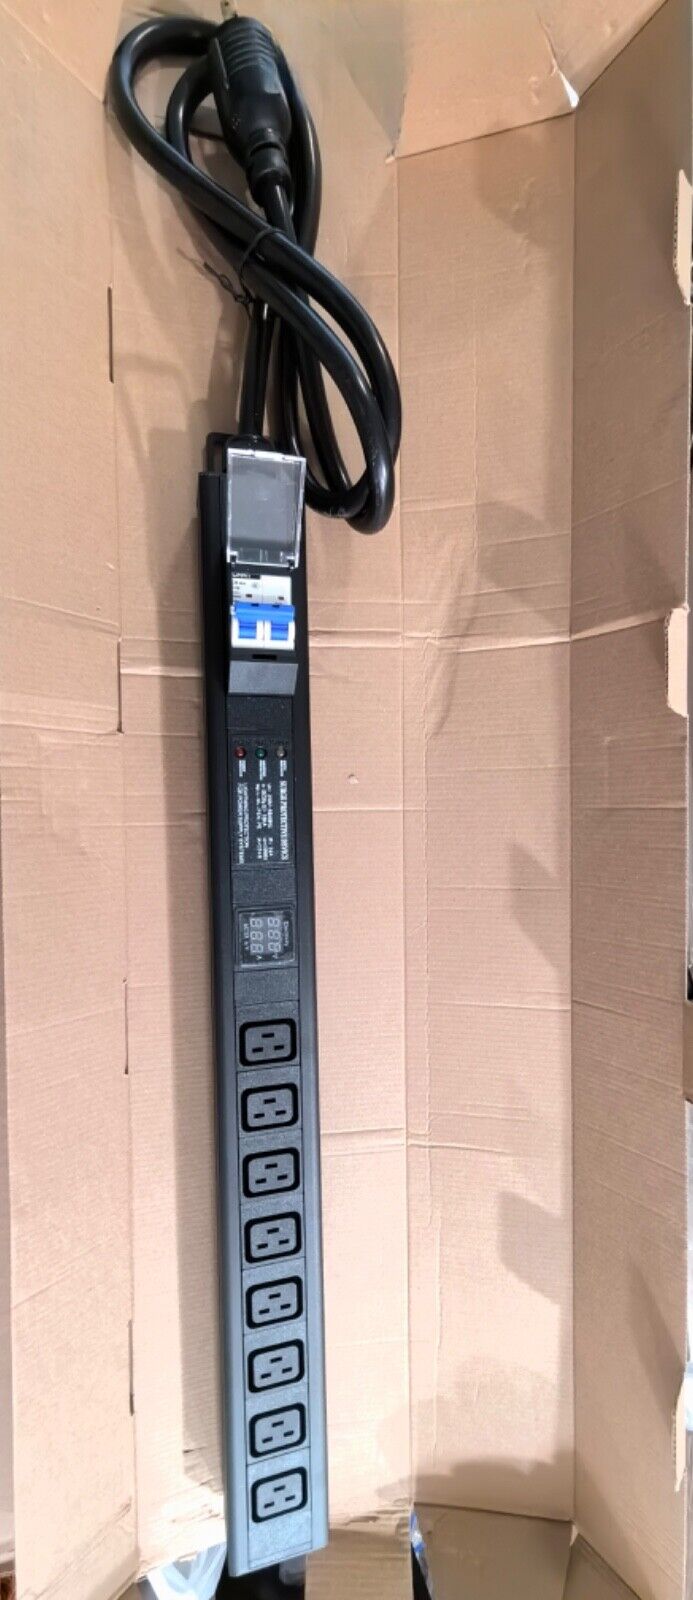 LCD Metered PDU 240V 30A L6-30P 8xC19 Crypto Mining 2p Breaker Surge Protector